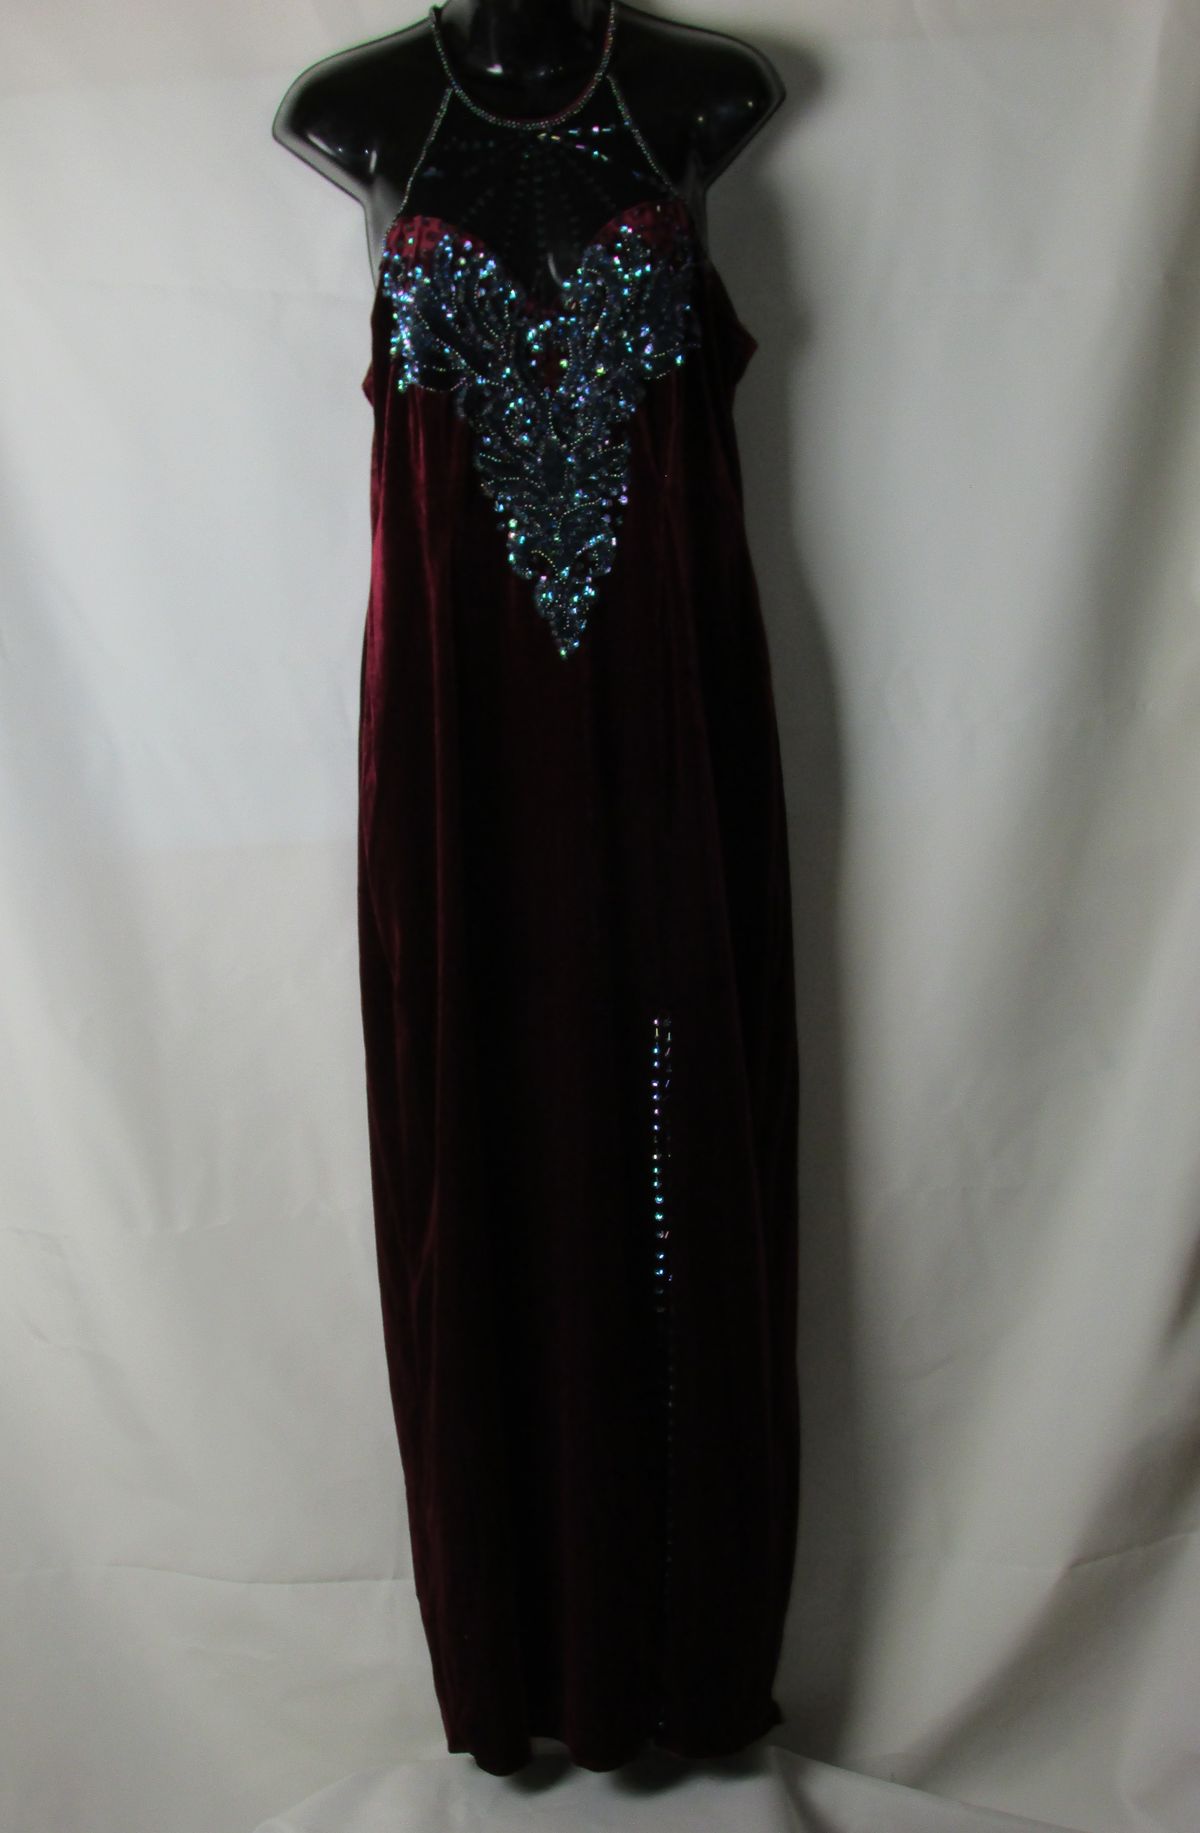 Size 4 Velvet Burgundy Red Ball Gown on Queenly